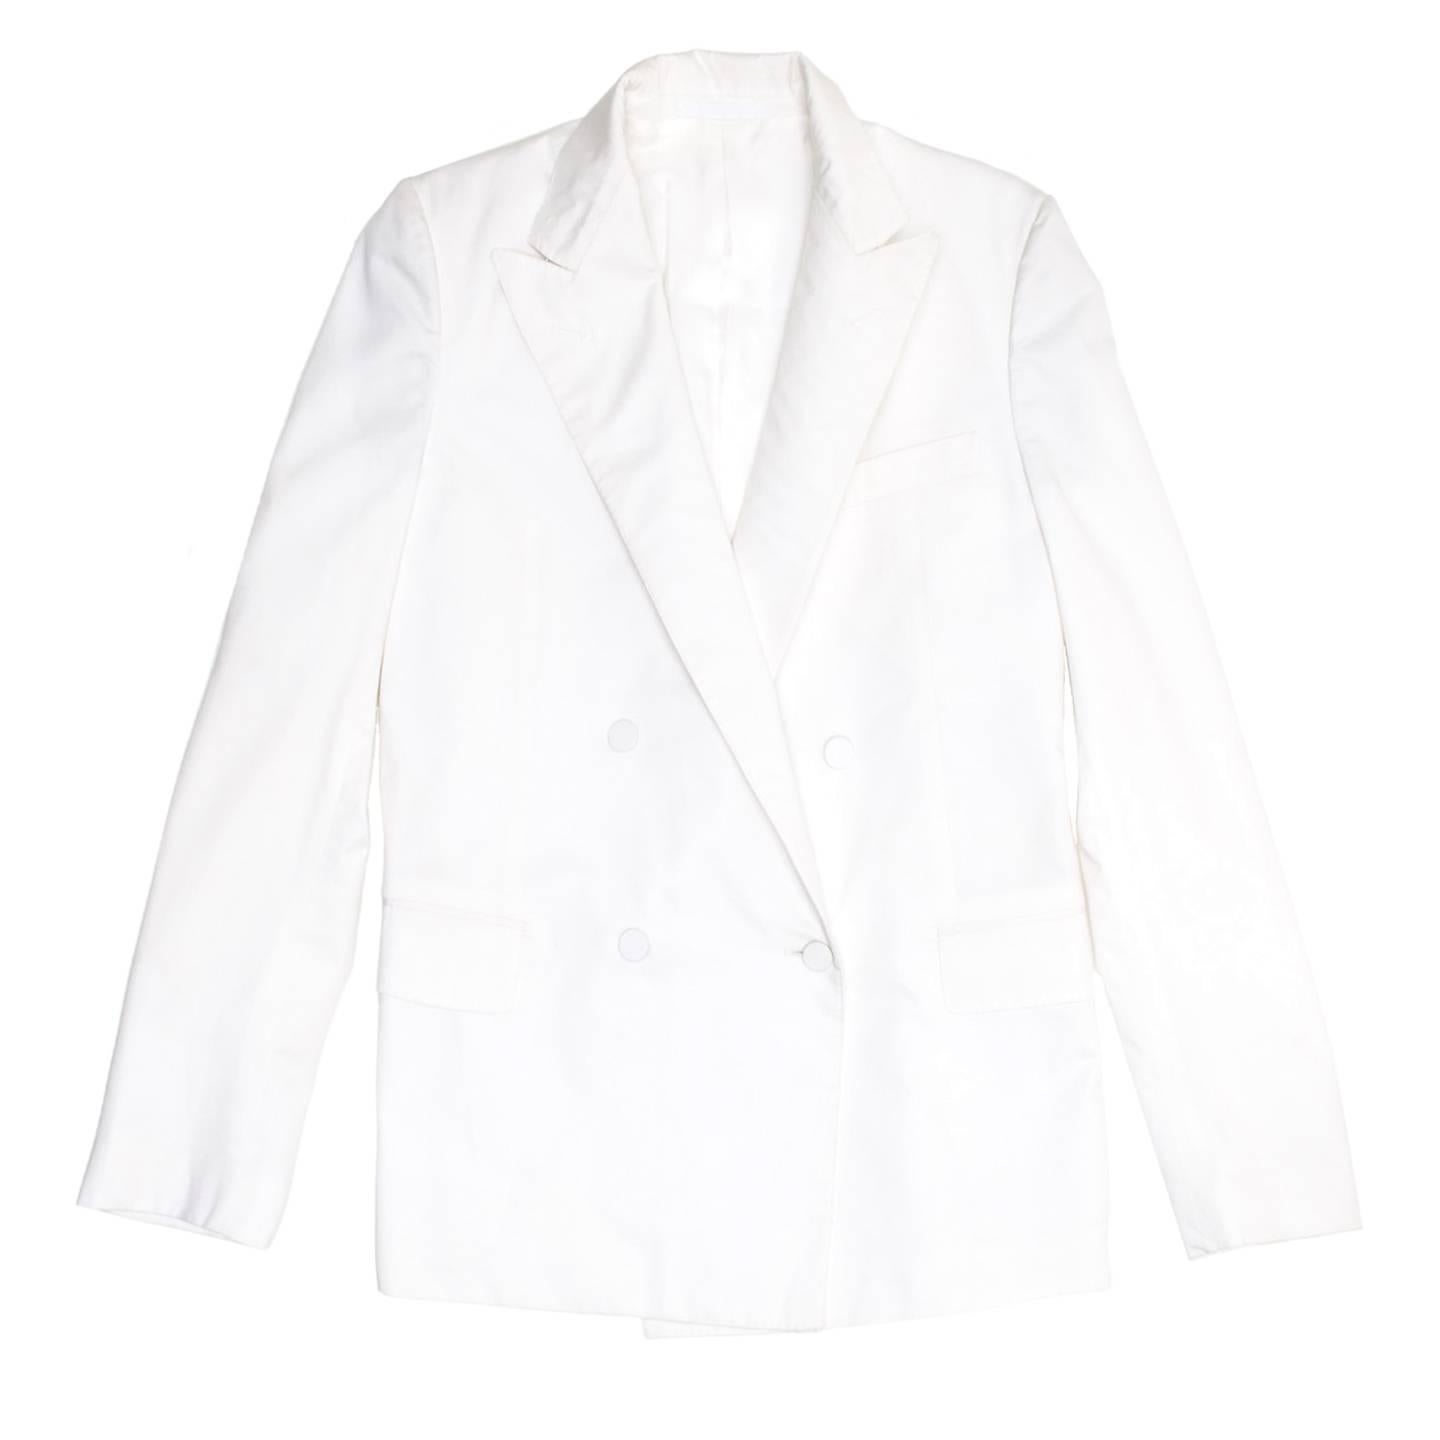 Elegant white cotton boxy blazer with peaked lapel and double breast closure. The front is enriched by self-fabric covered buttons, a breast pocket and two flap pockets at waist, while the back has two vents. Made in Italy.

Size  42 French